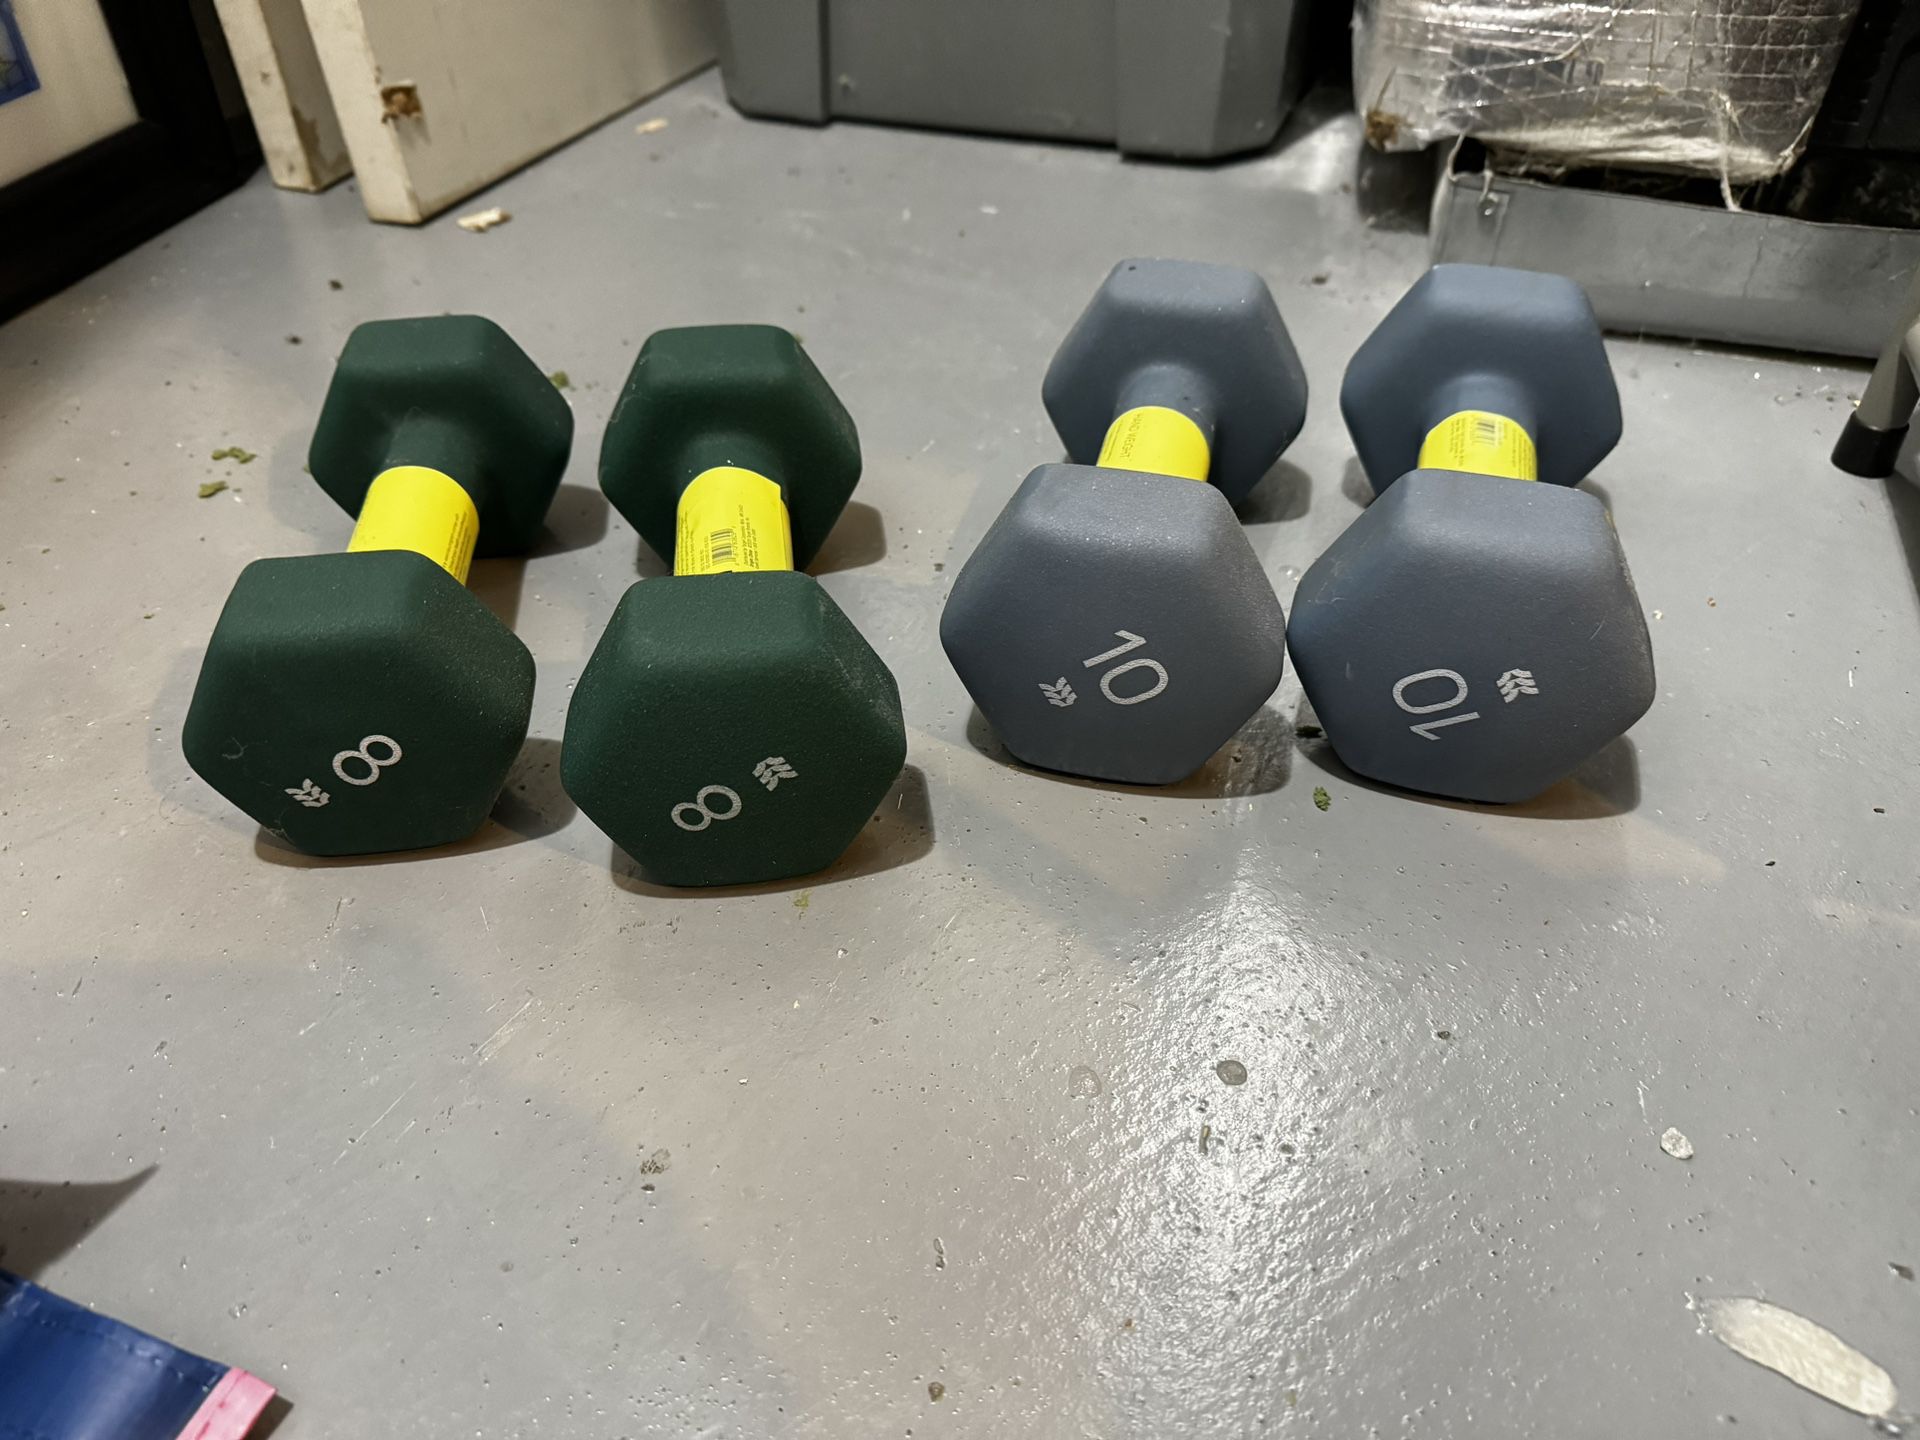 Two 8 pound and Two 10 Pound dumbbells 